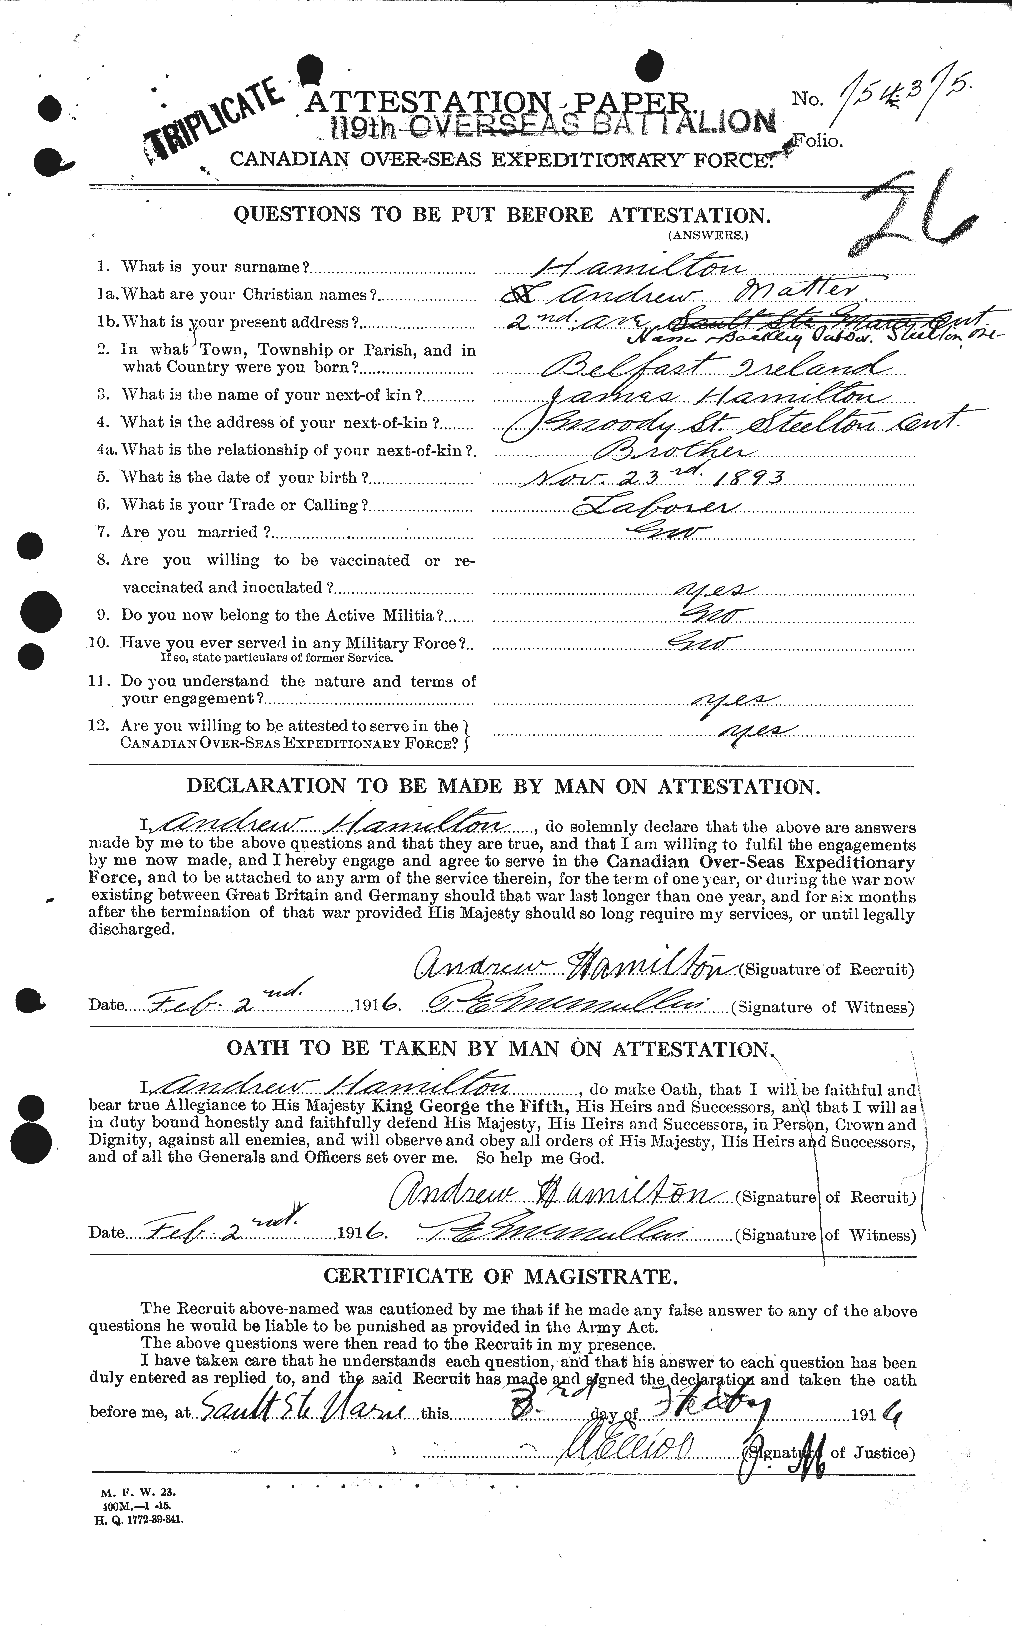 Personnel Records of the First World War - CEF 375228a